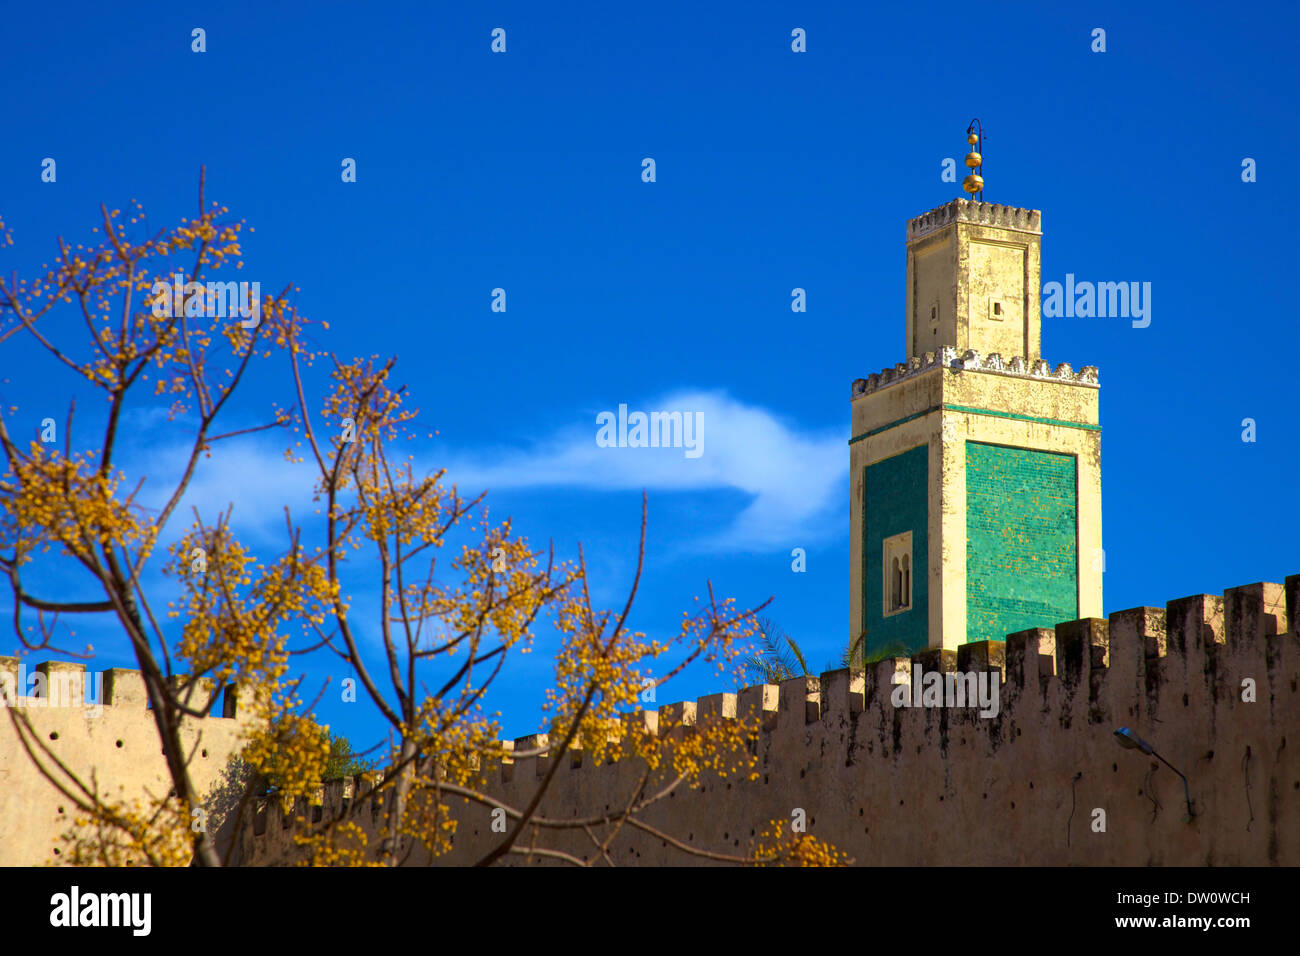 Place Lalla Aouda And The Minaret Of The Lalla Aouda Mosque, Meknes, Morocco, North Africa Stock Photo